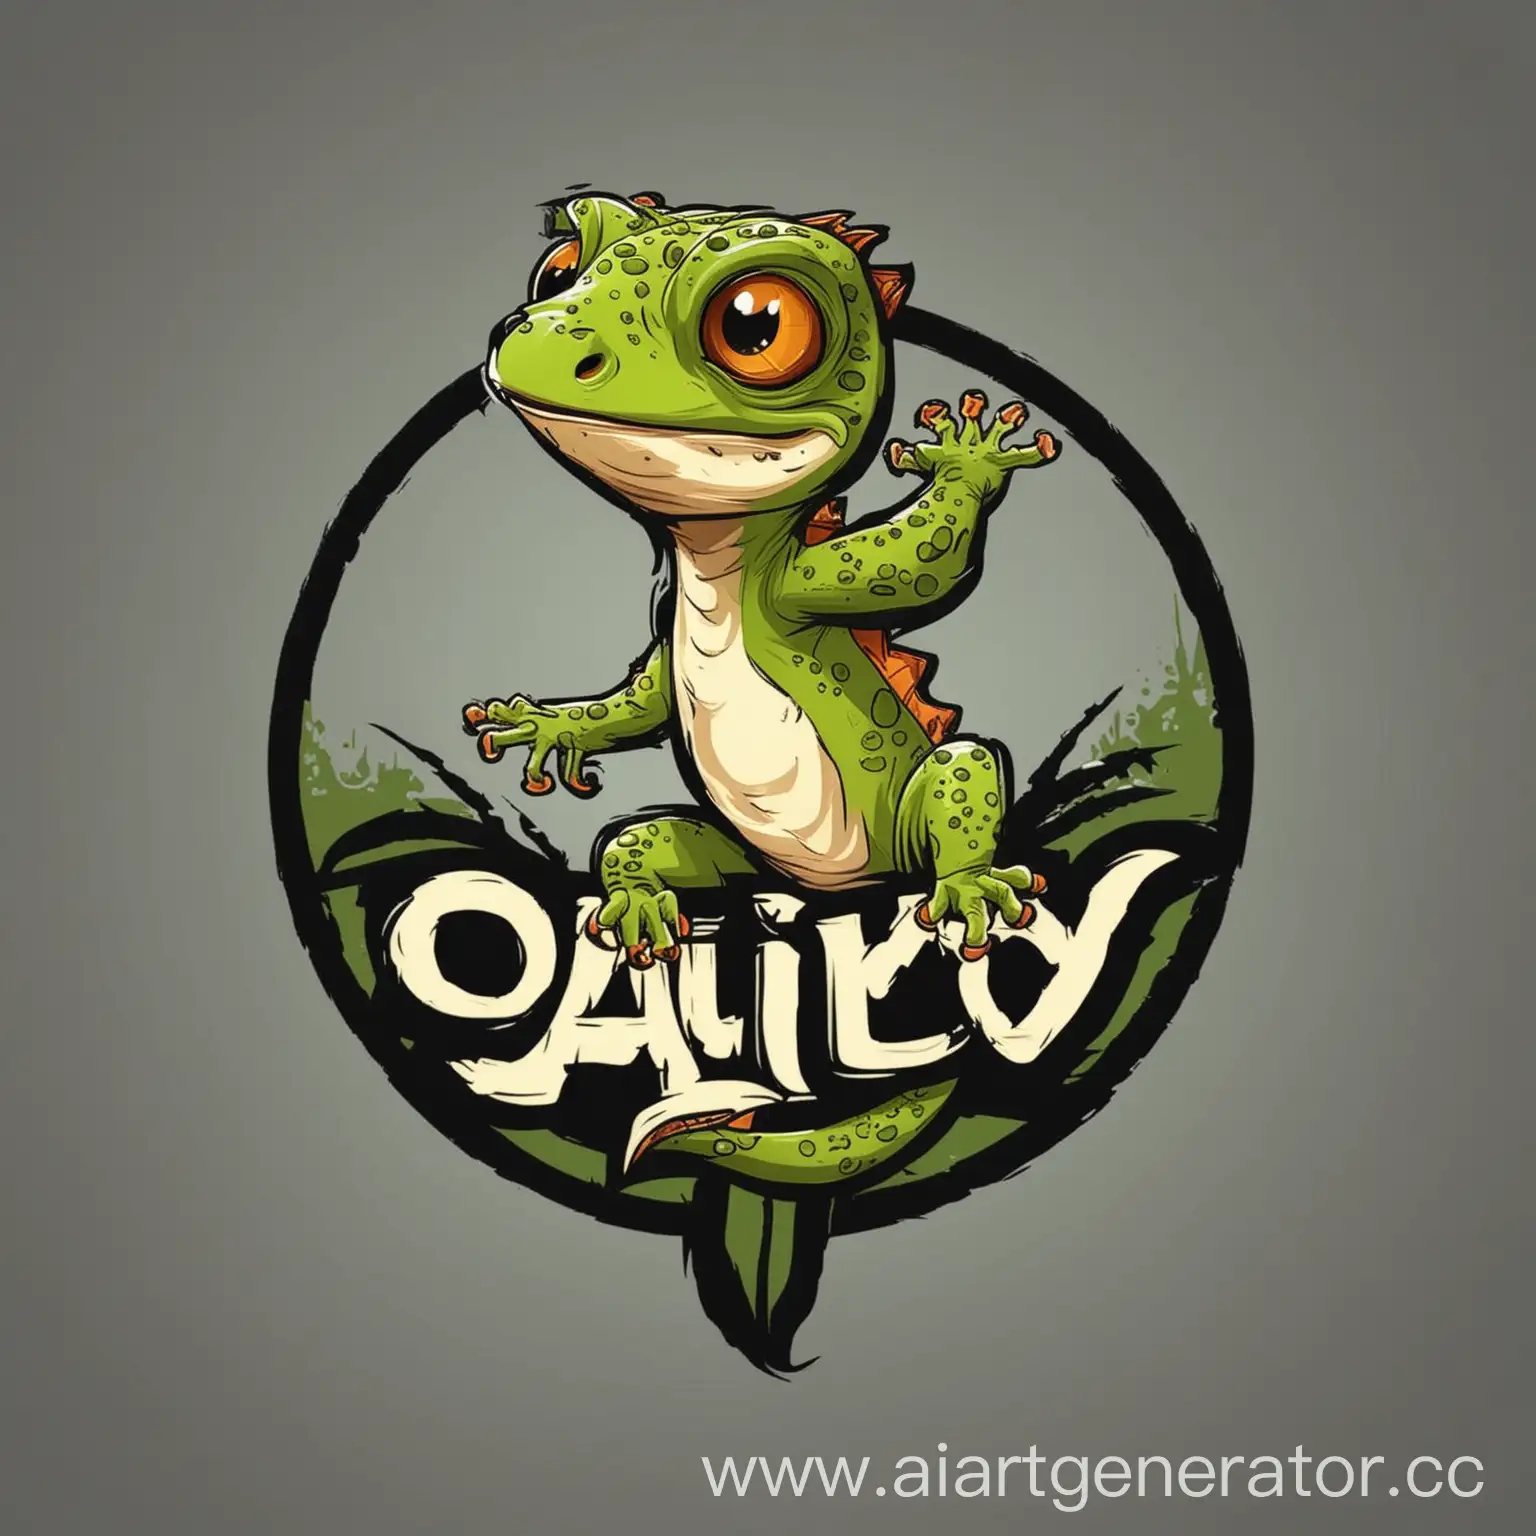 Agile-Gecko-in-Vector-Graphics-Demonstrating-Swiftness-and-Agility